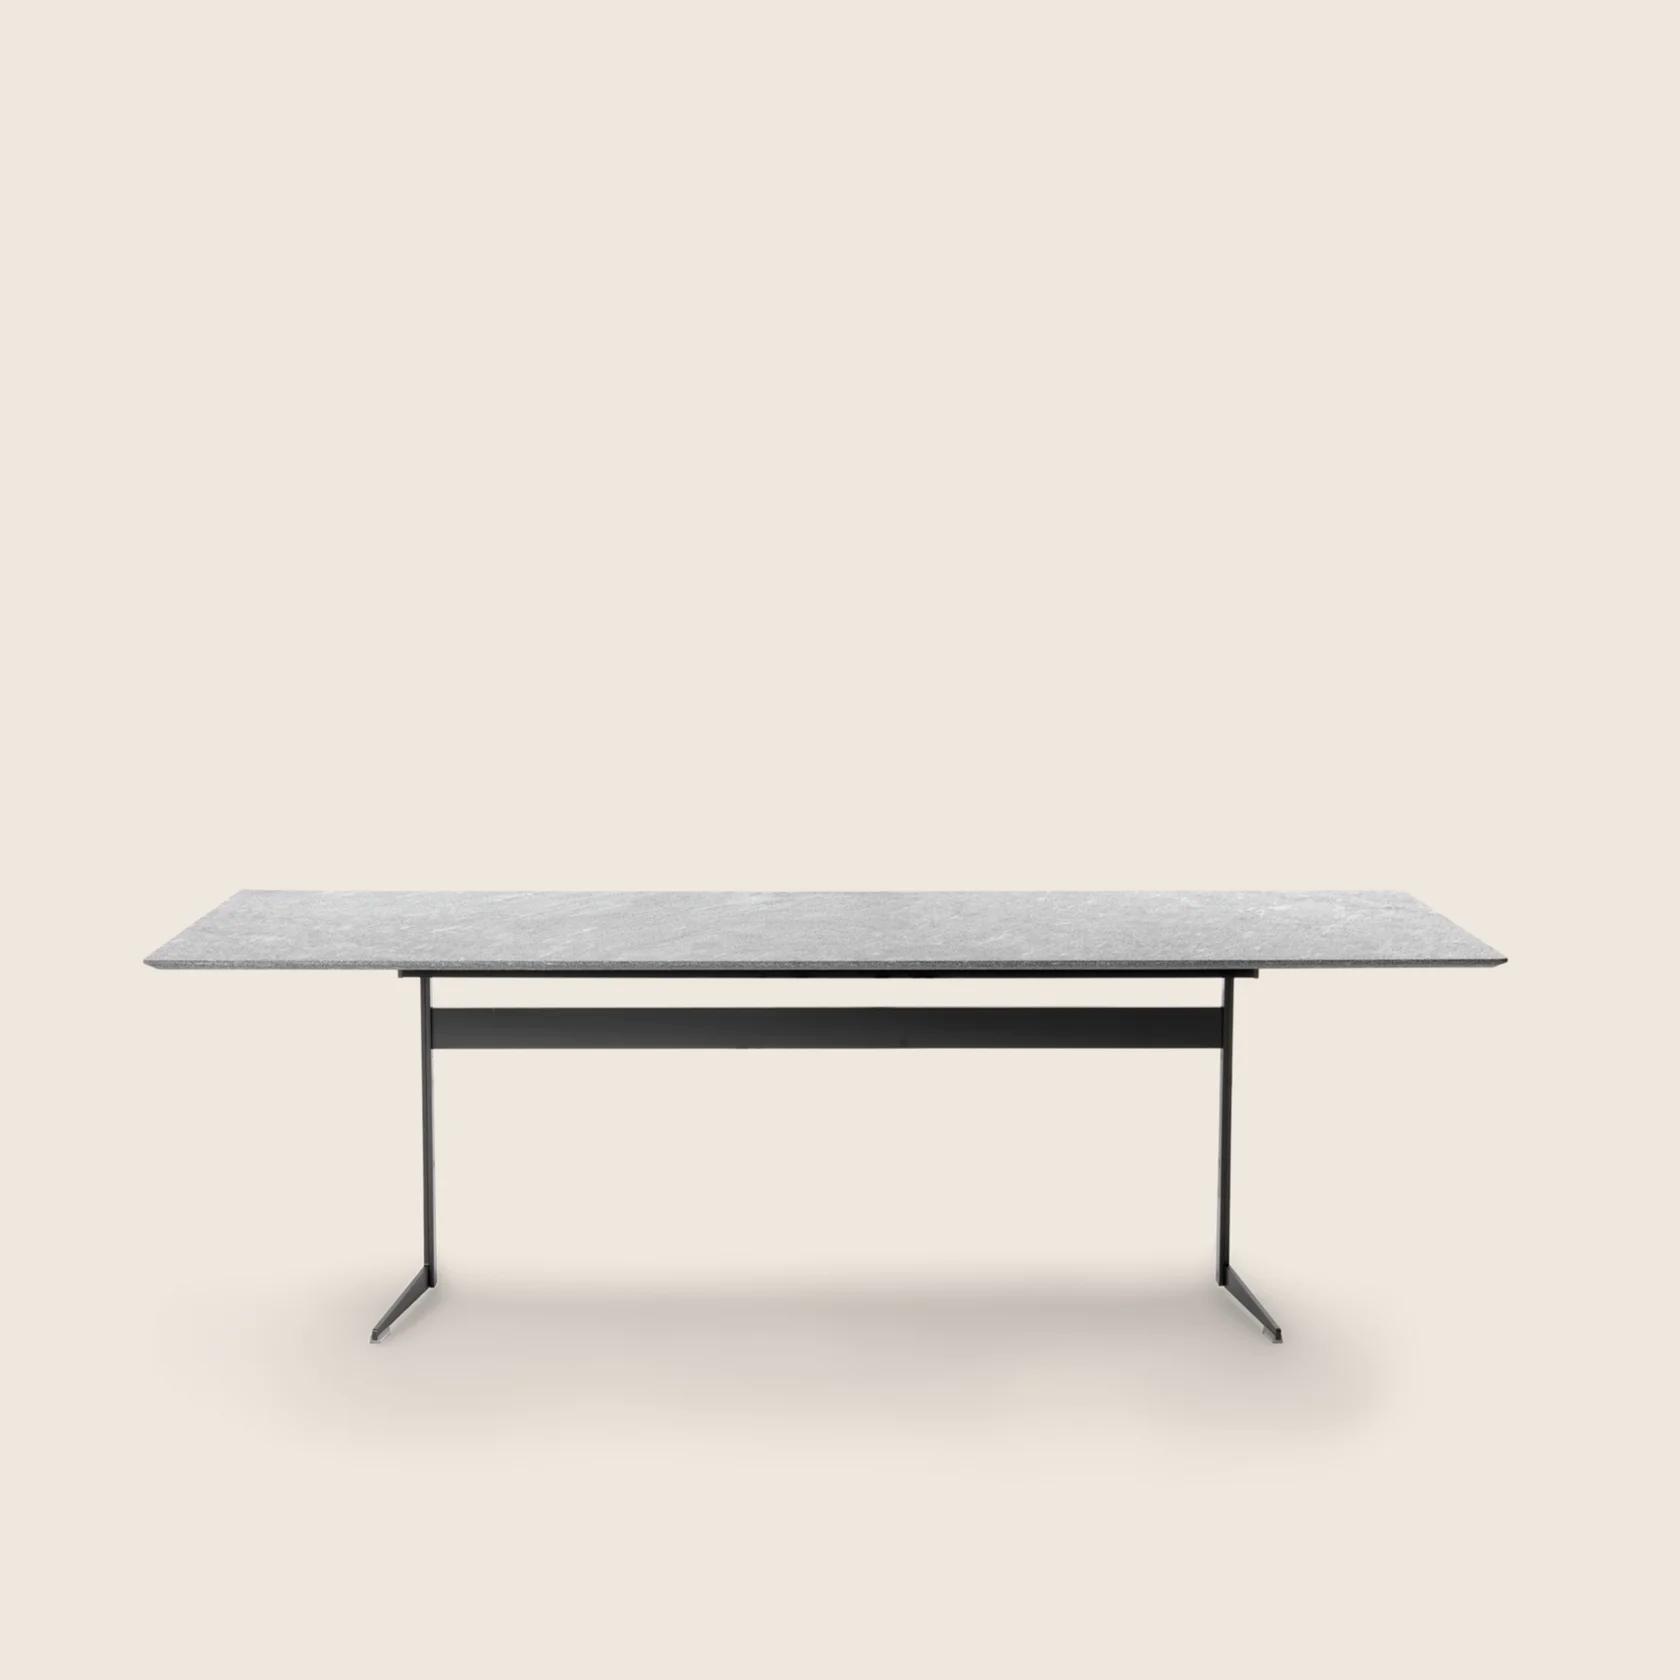 014XL8_FLY OUTDOOR_TABLE_01.png